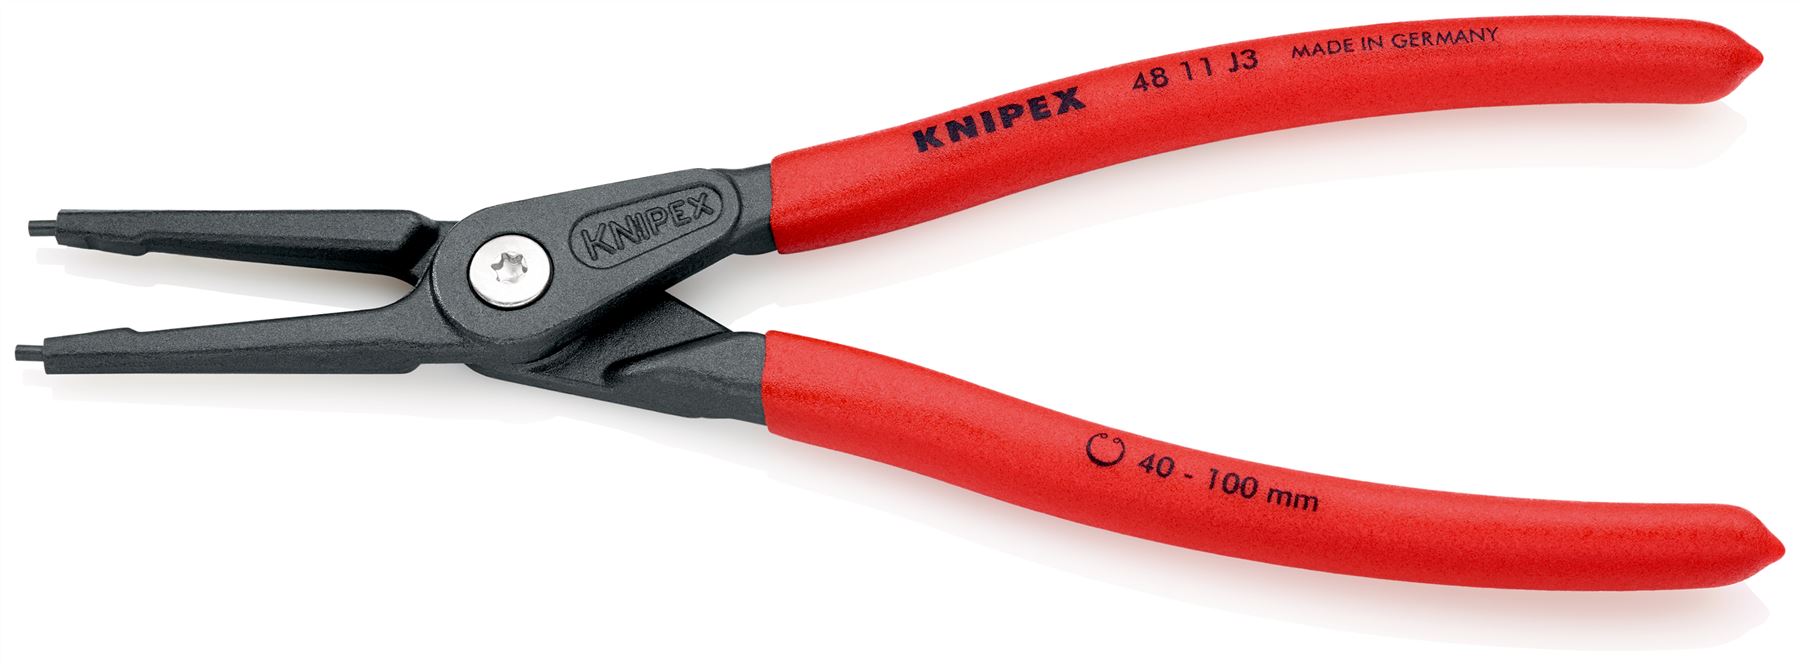 KNIPEX Precision Circlip Pliers for Internal Circlips in Bore Holes 225mm 2.3mm Diameter Tips 40 11 J3